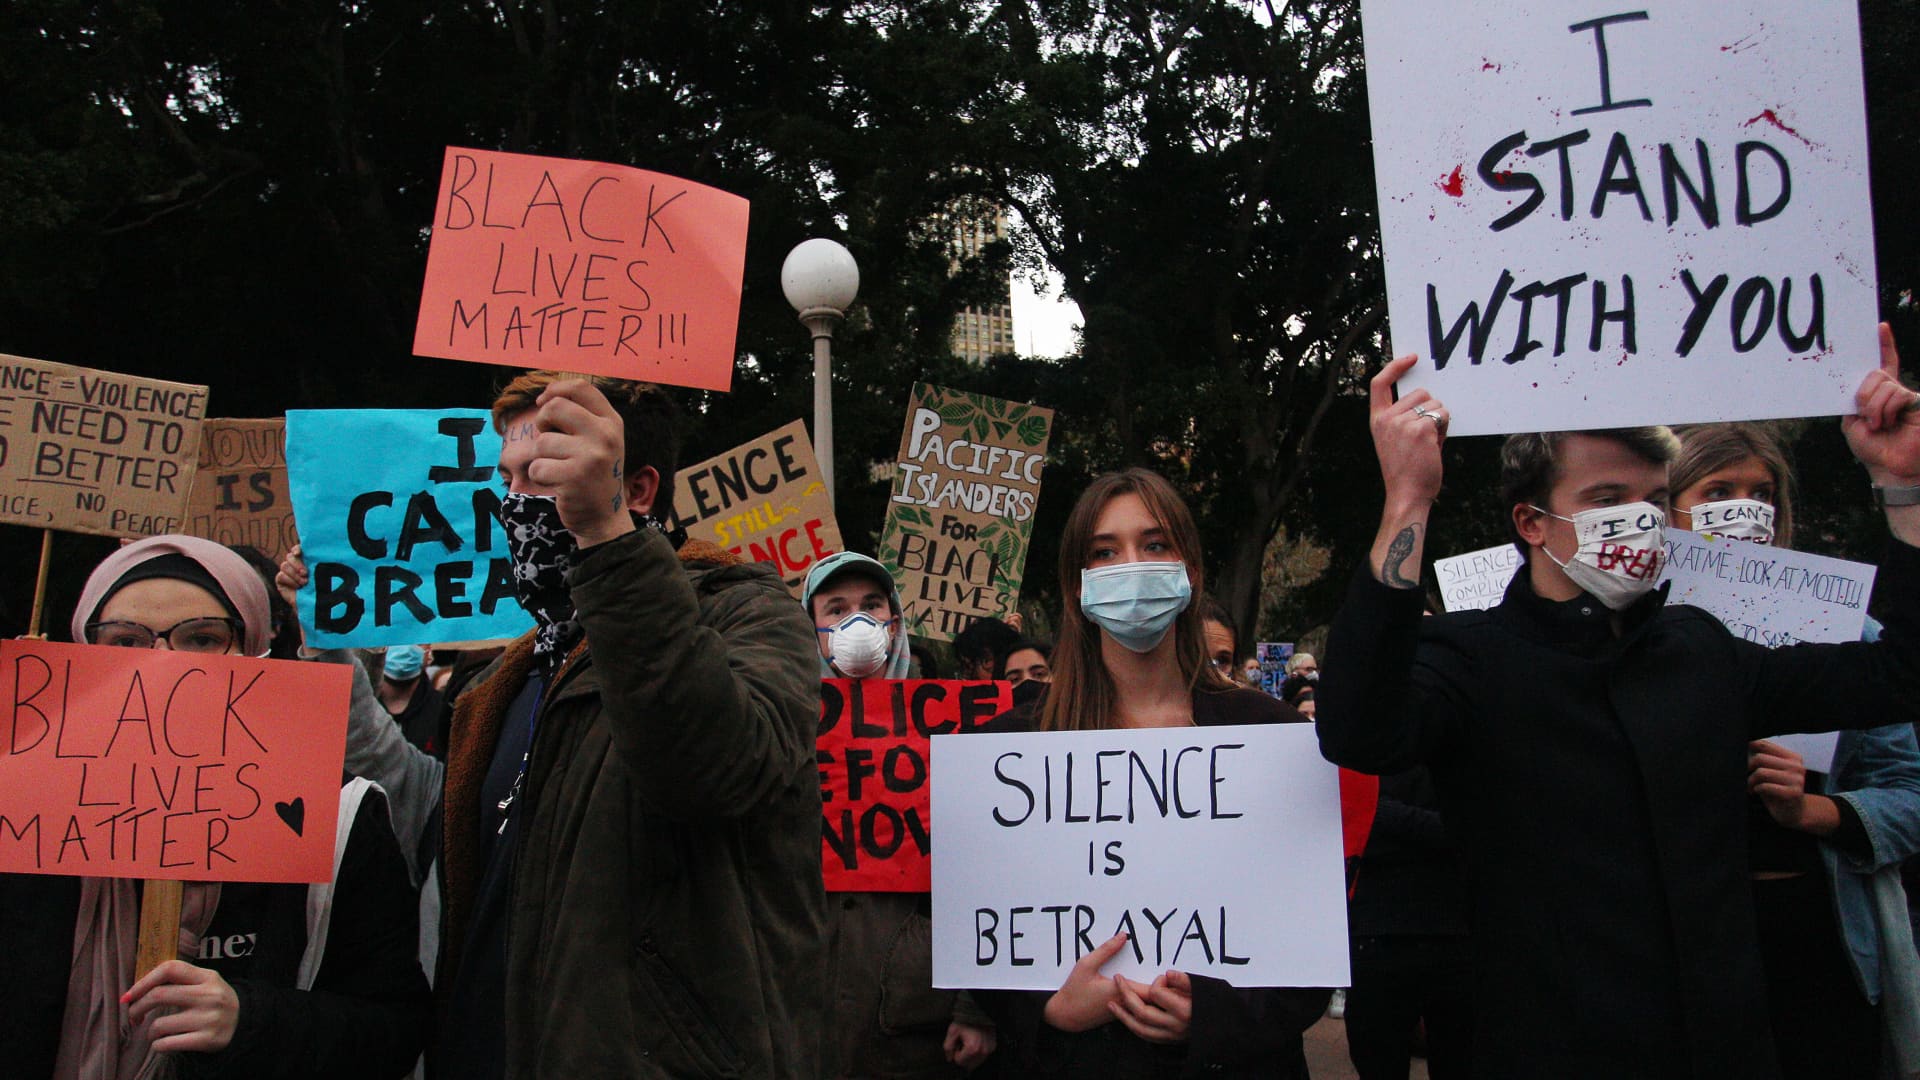 Protesters demonstrate in Hyde Park during a 'Black Lives Matter' rally on June 02, 2020 in Sydney, Australia. The event was organised to rally against aboriginal deaths in custody in Australia as well as in solidarity with protests across the United States following the killing of an unarmed black man George Floyd at the hands of a police officer in Minneapolis, Minnesota.